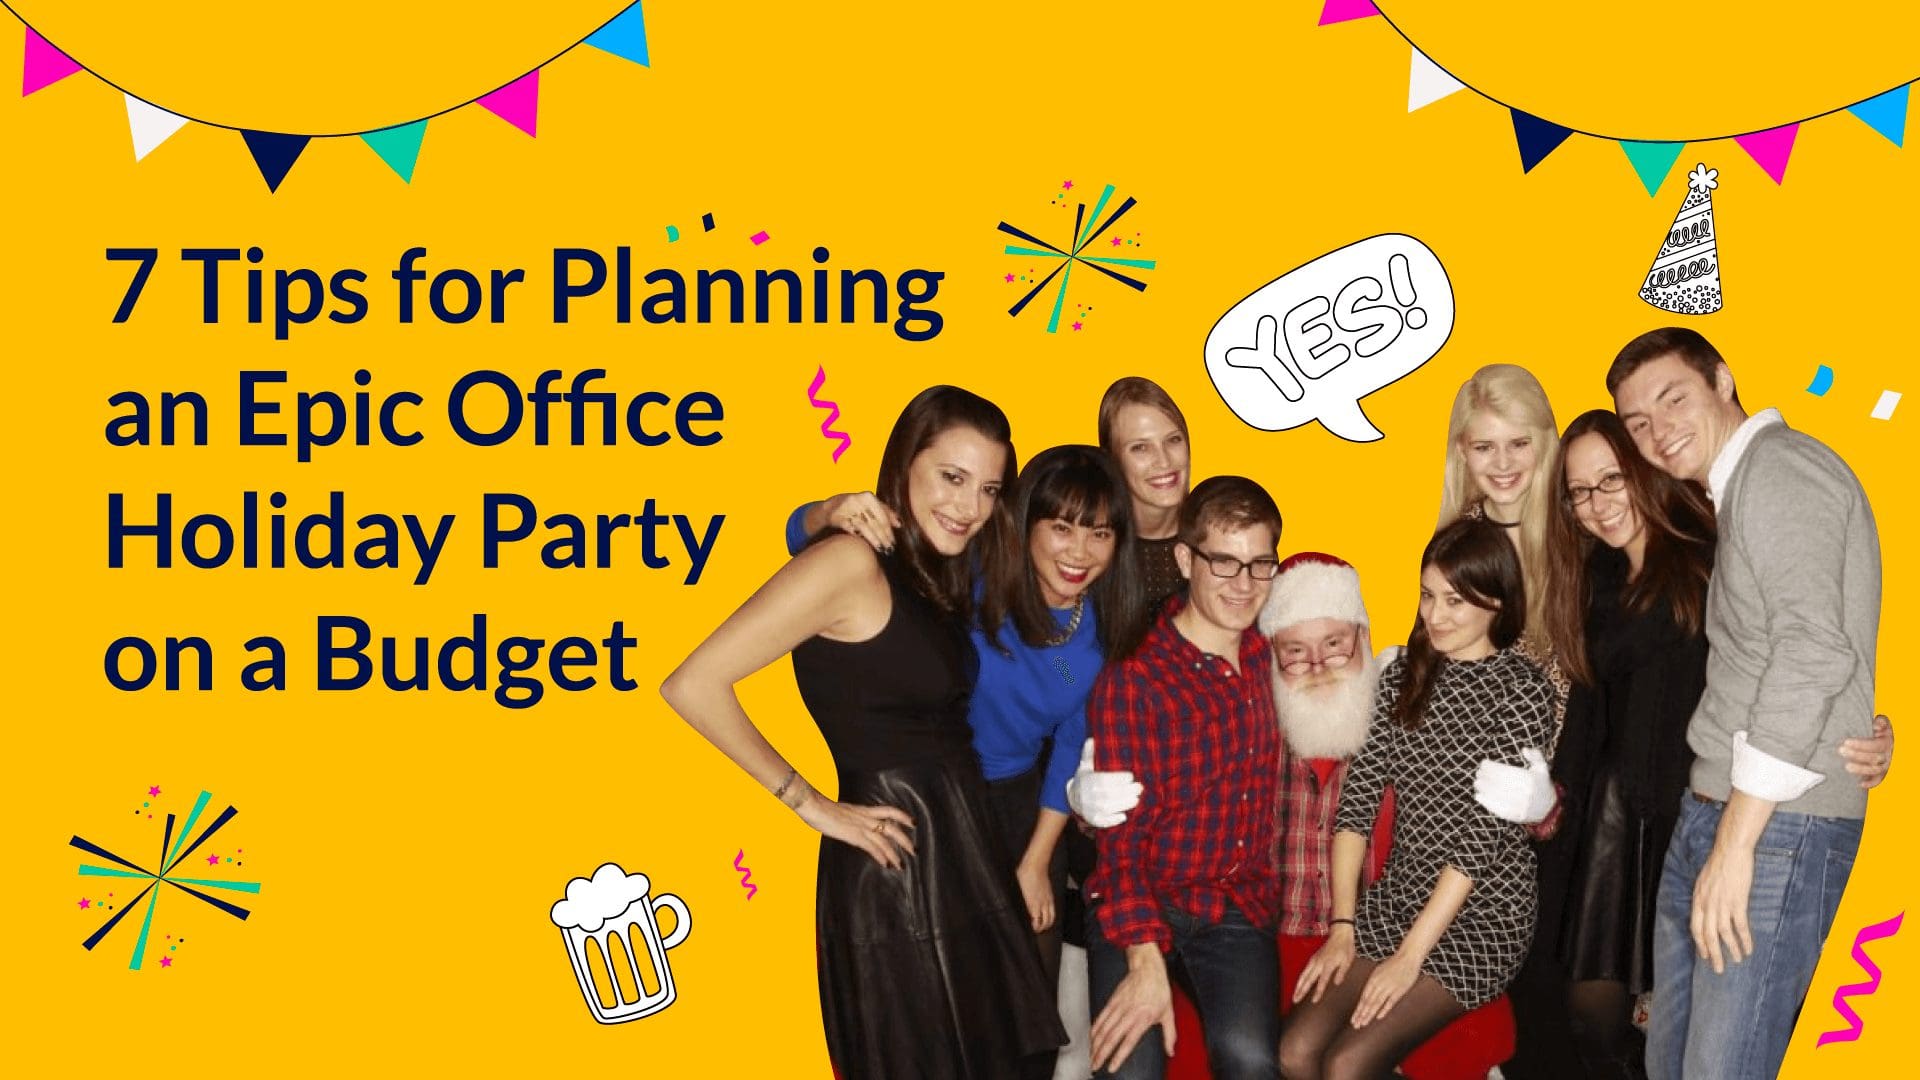 7 tips for planning an epic office holiday party on a budget